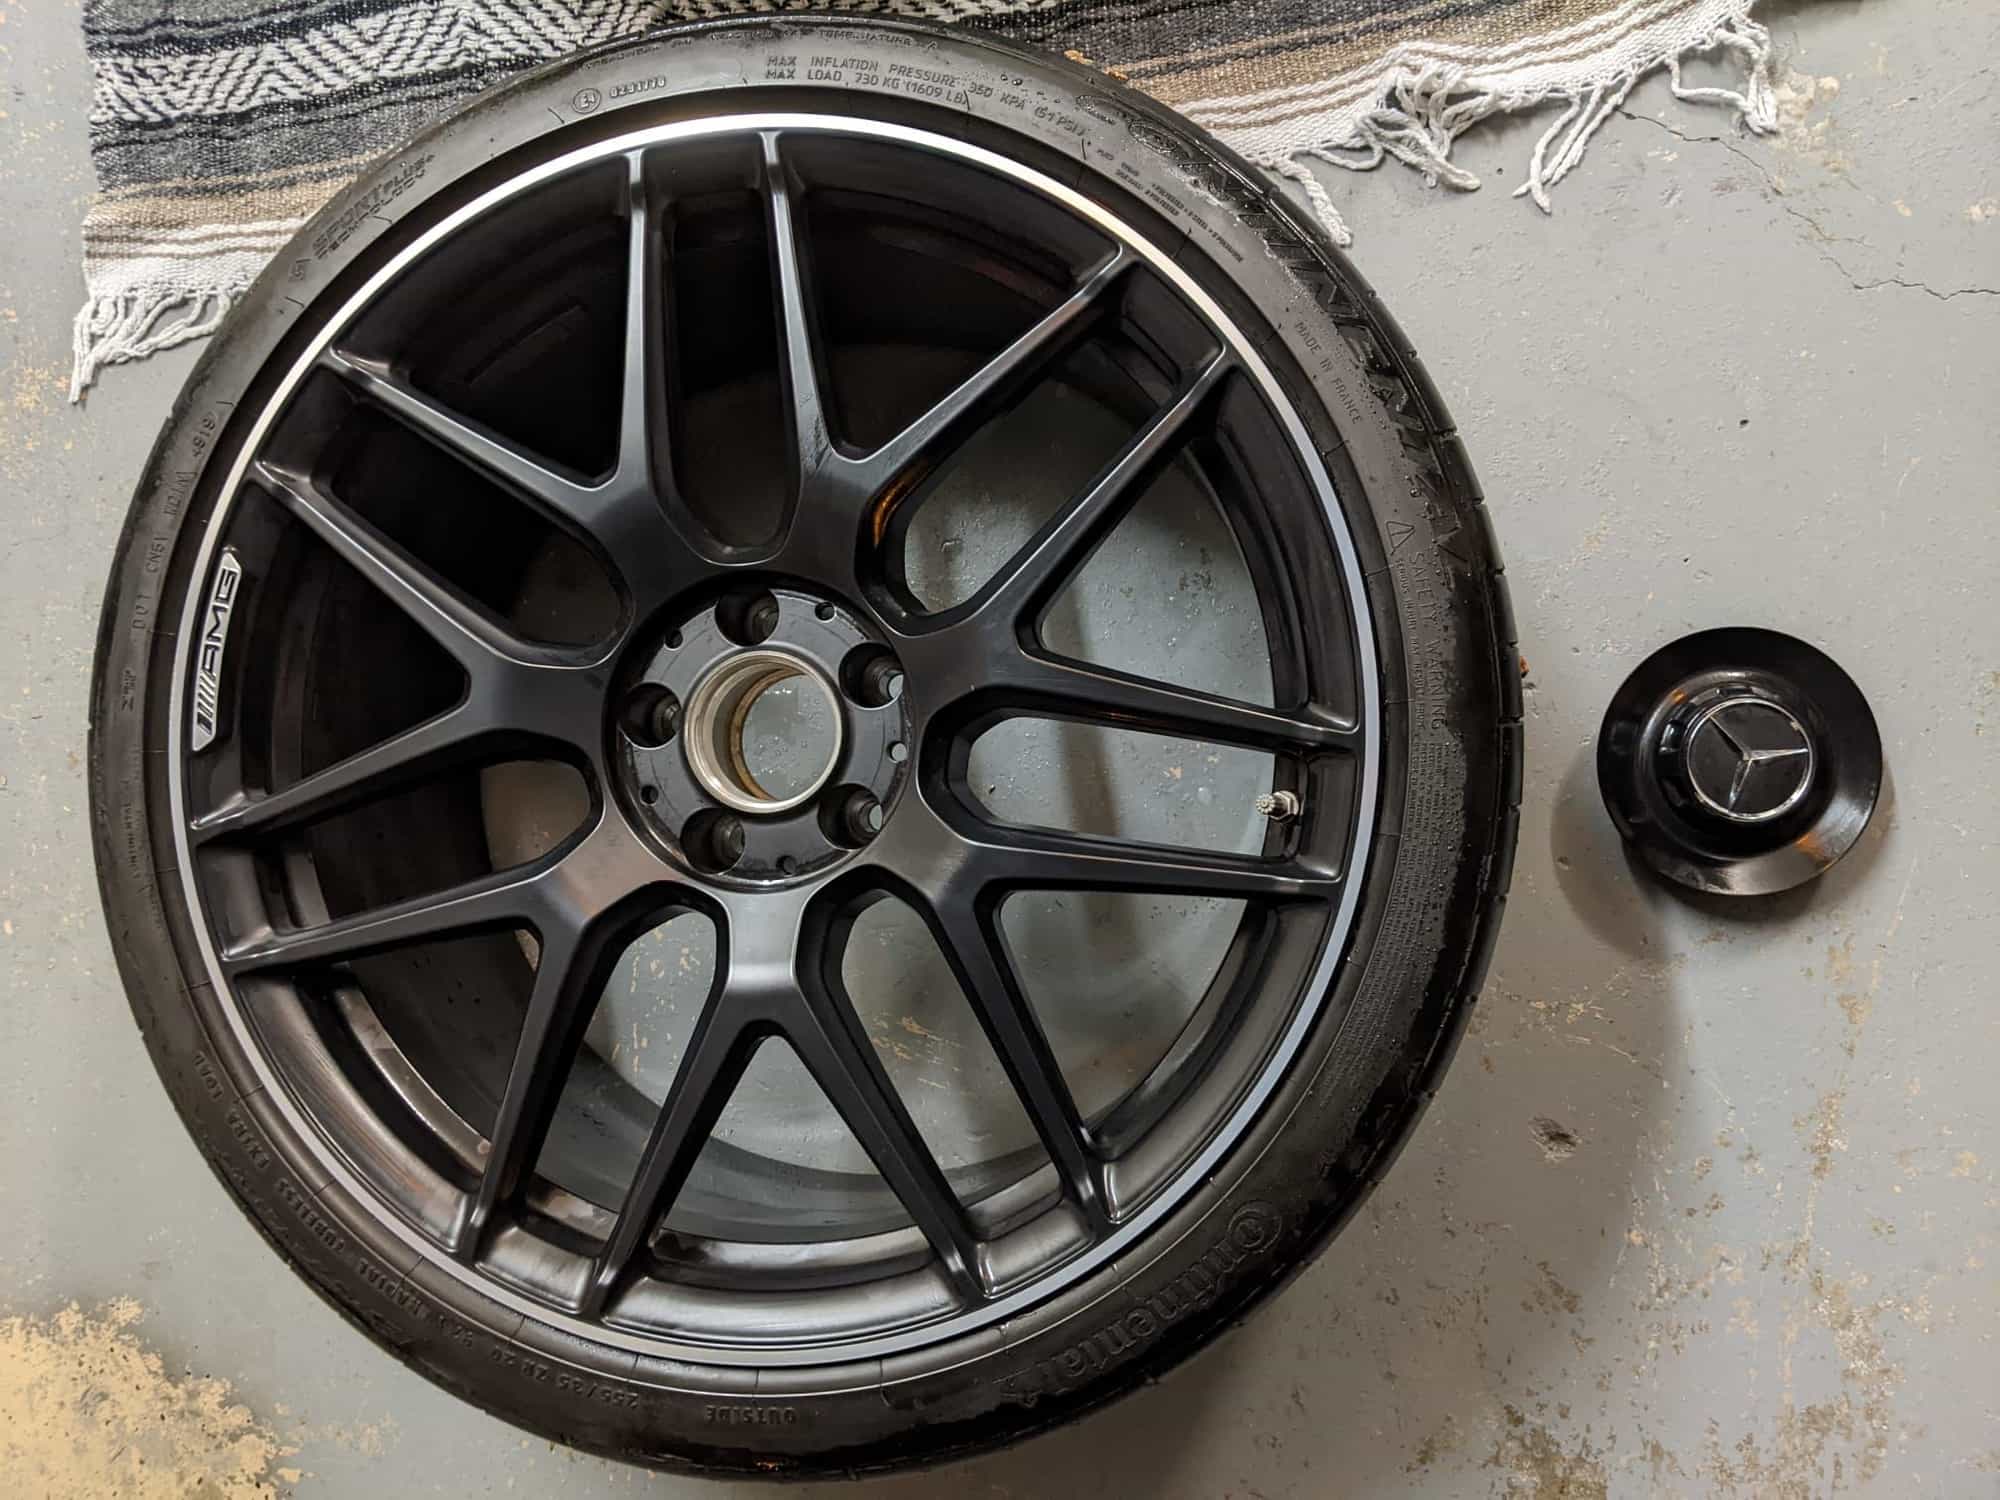 Wheels and Tires/Axles - MERCEDES OEM WHEELS for E63s W213 - Used - 2018 to 2021 Mercedes-Benz E63 AMG S - Weston, FL 33332, United States